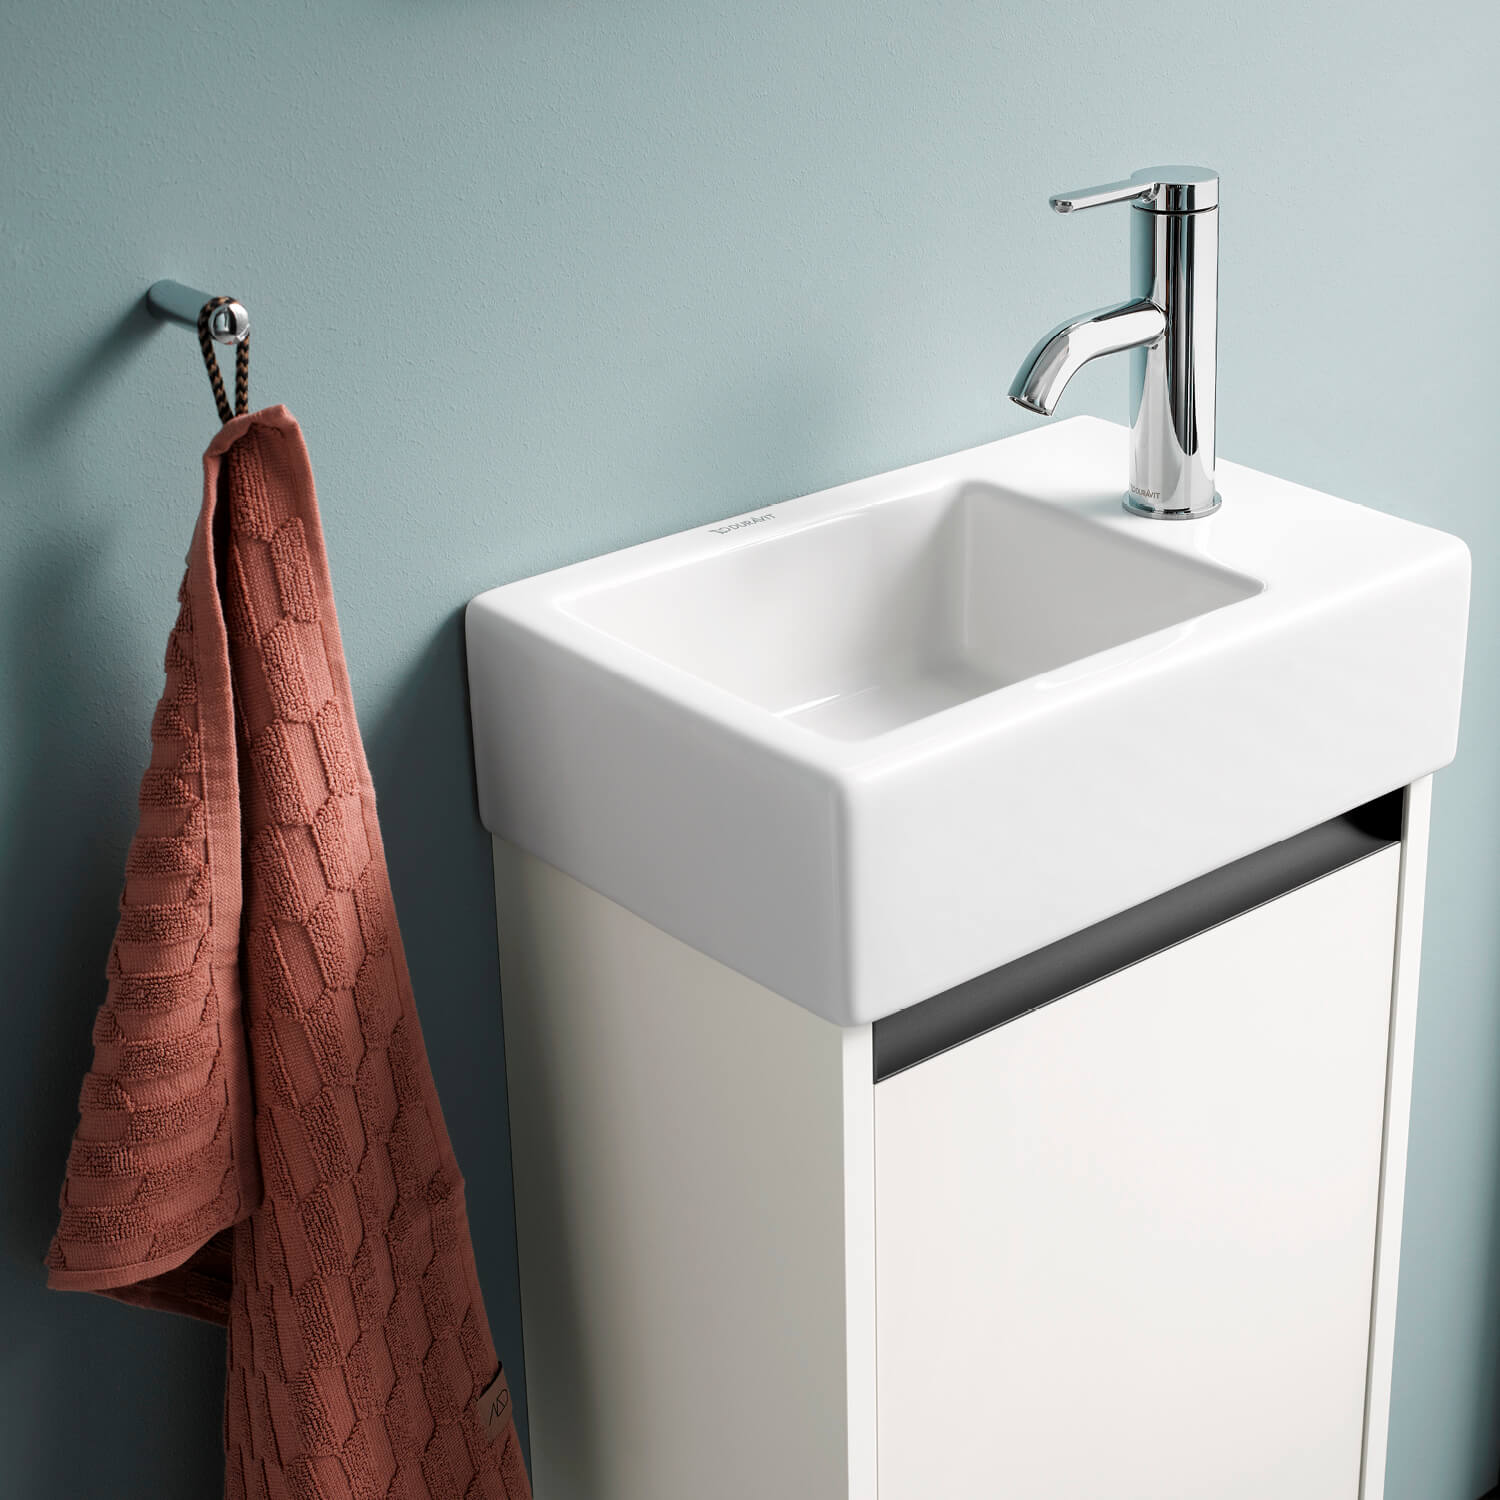 C.1  faucet and Ketho.2 vanity unit
